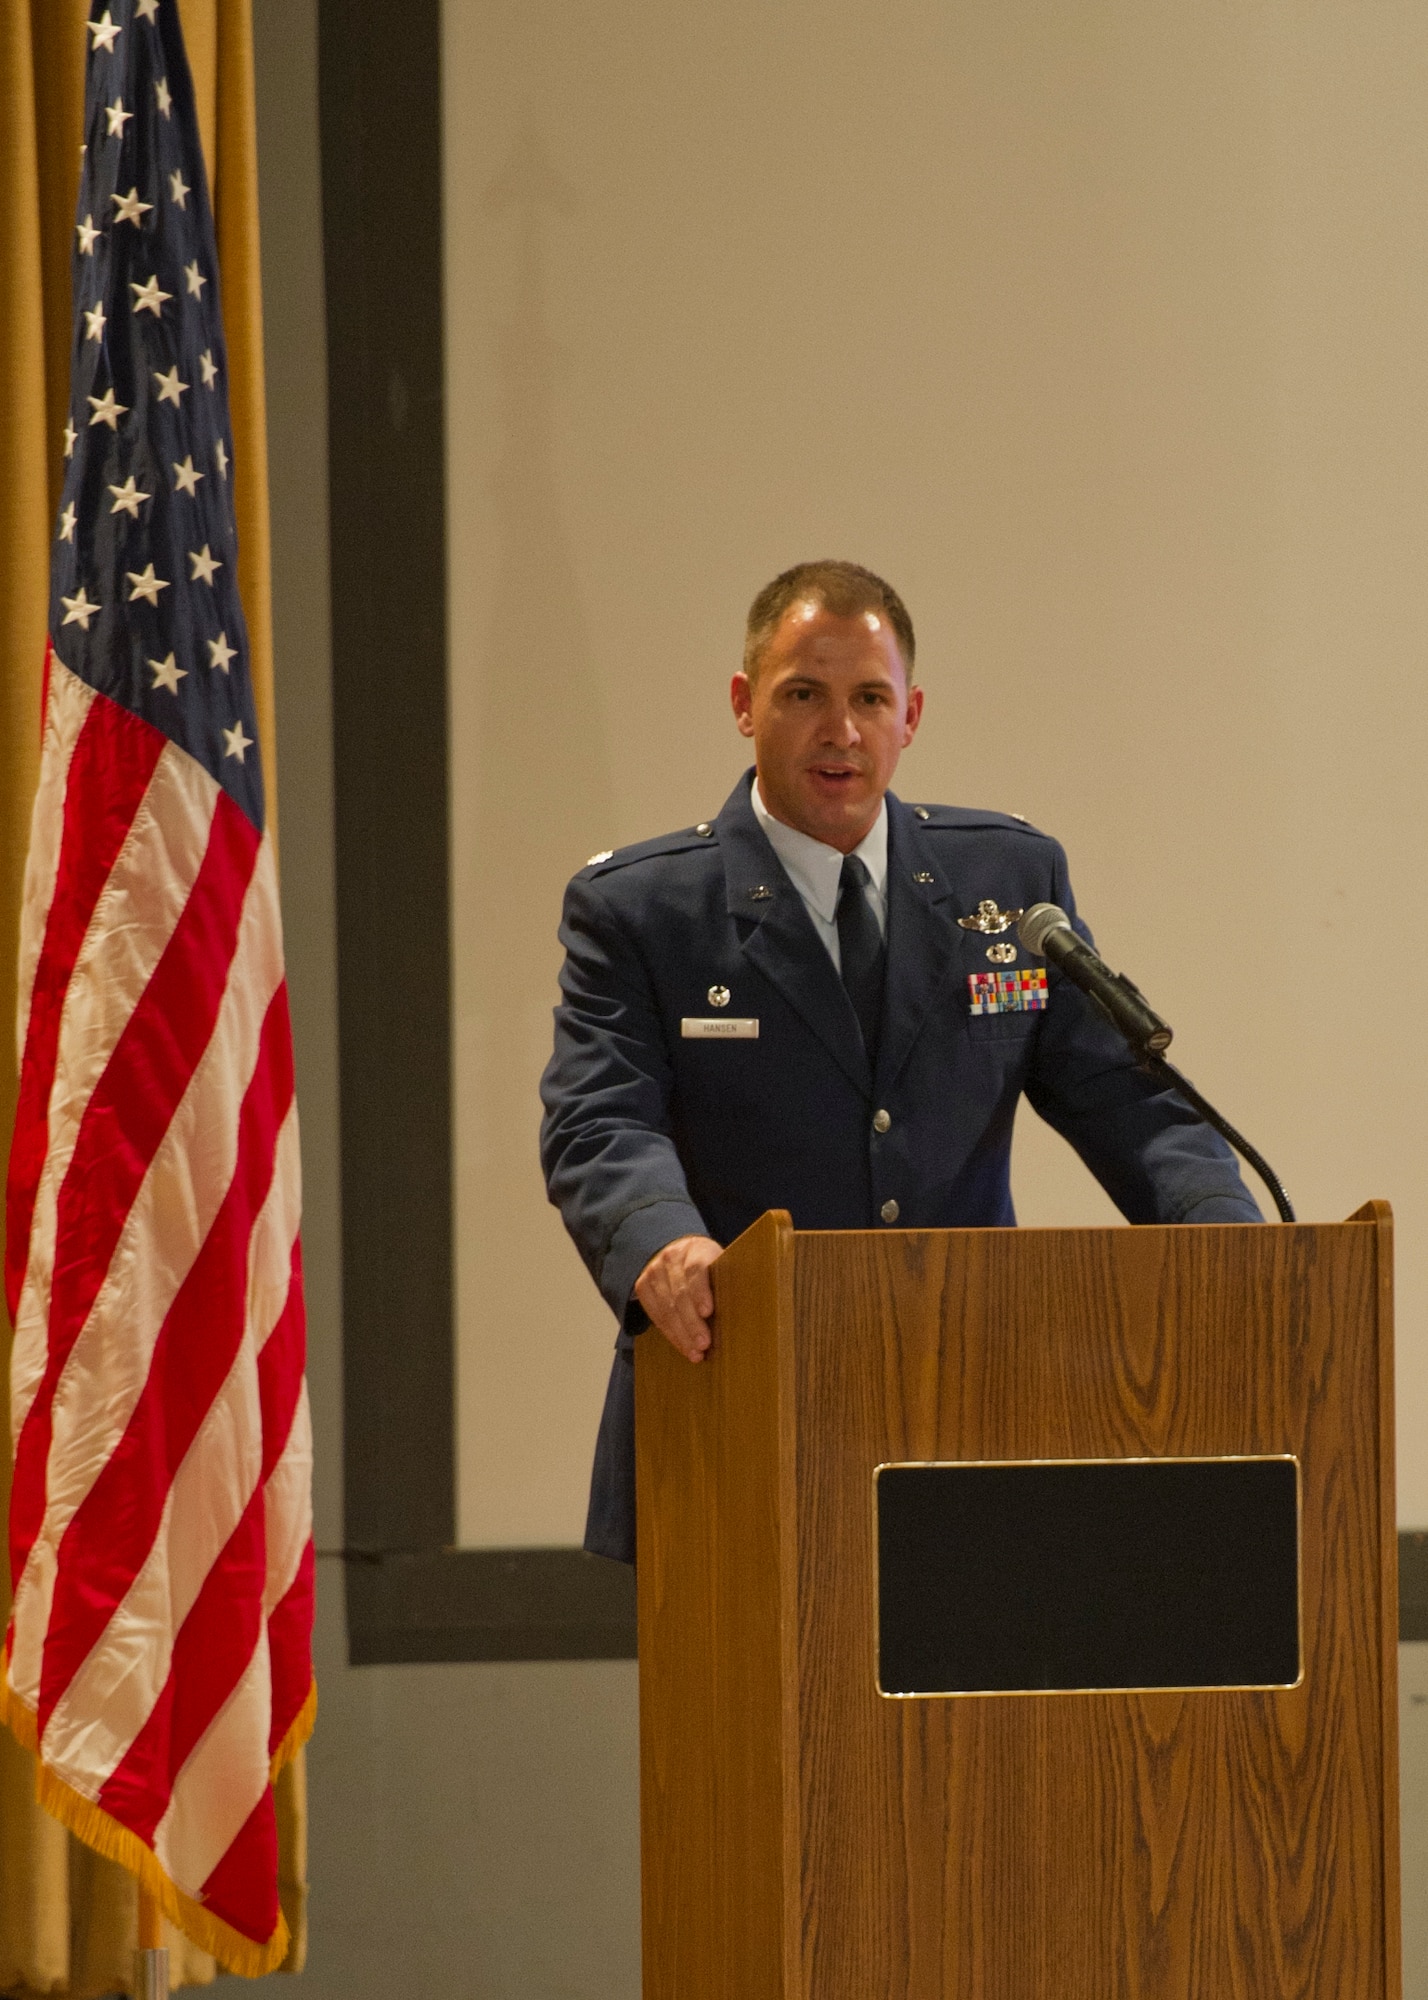 Lieutenant Col. Nathan Hansen, 29th Attack Squadron commander, speaks during an MQ-9 Reaper winging ceremony at the Holloman Air Force Base, N.M., base theater Aug. 16. The graduation ceremony marks the first time a student pilot in the Air Force Specialty Code 18X has completed the MQ-9 Basic Course without having been previously qualified in a manned aircraft. The basic course at Holloman AFB, which is about six months long, accounts for almost half of the total 18X training pipeline. (U.S. Air Force photo by Senior Airman Siuta B. Ika/ Released)